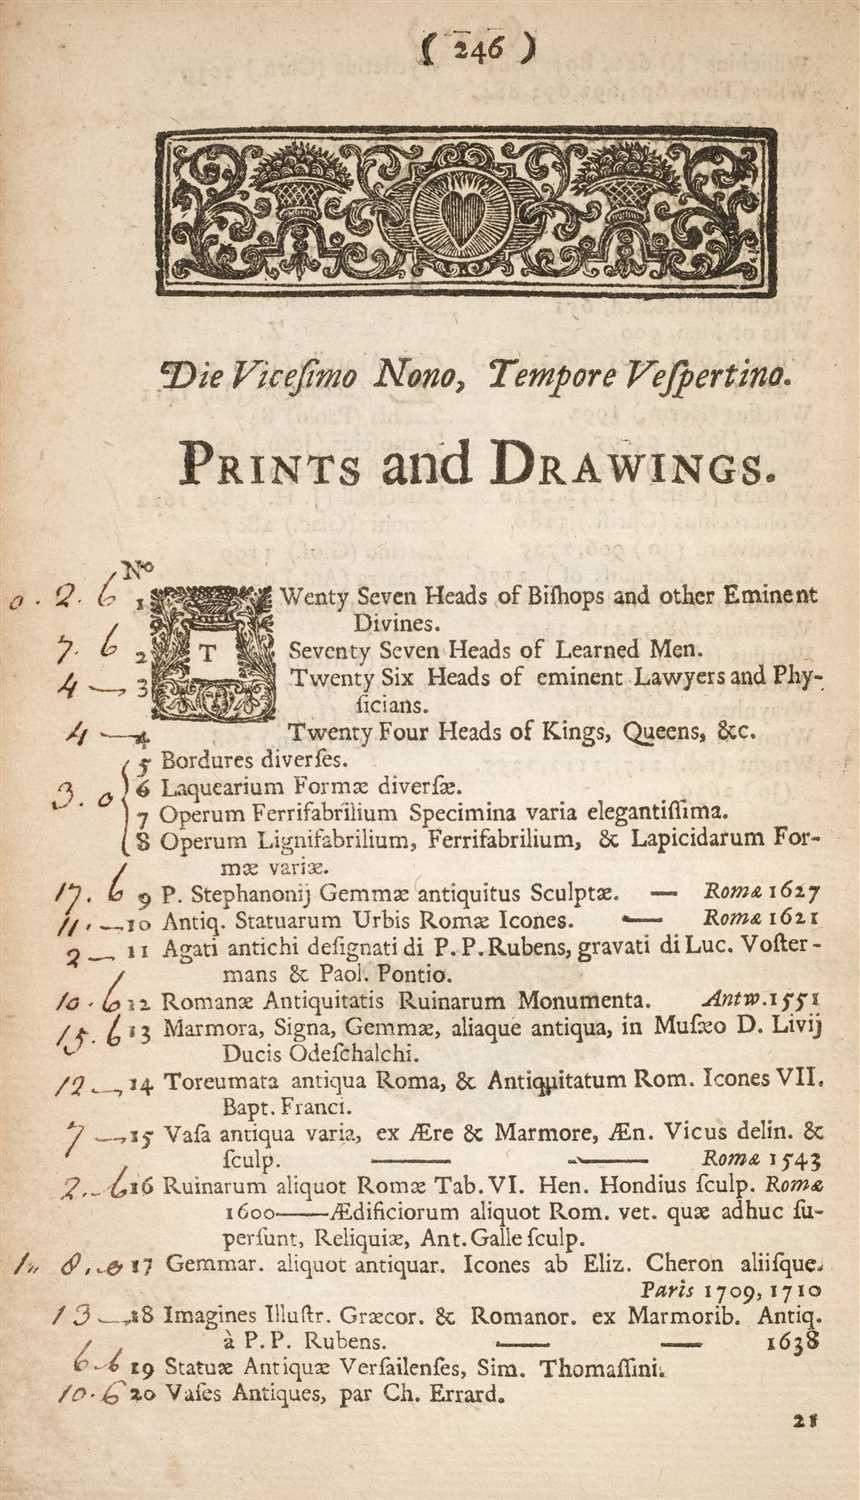 Lot 160 - Auction Catalogue. A Catalogue of the Library, Antiquities, &c. of ... Dr. Woodward, 1728